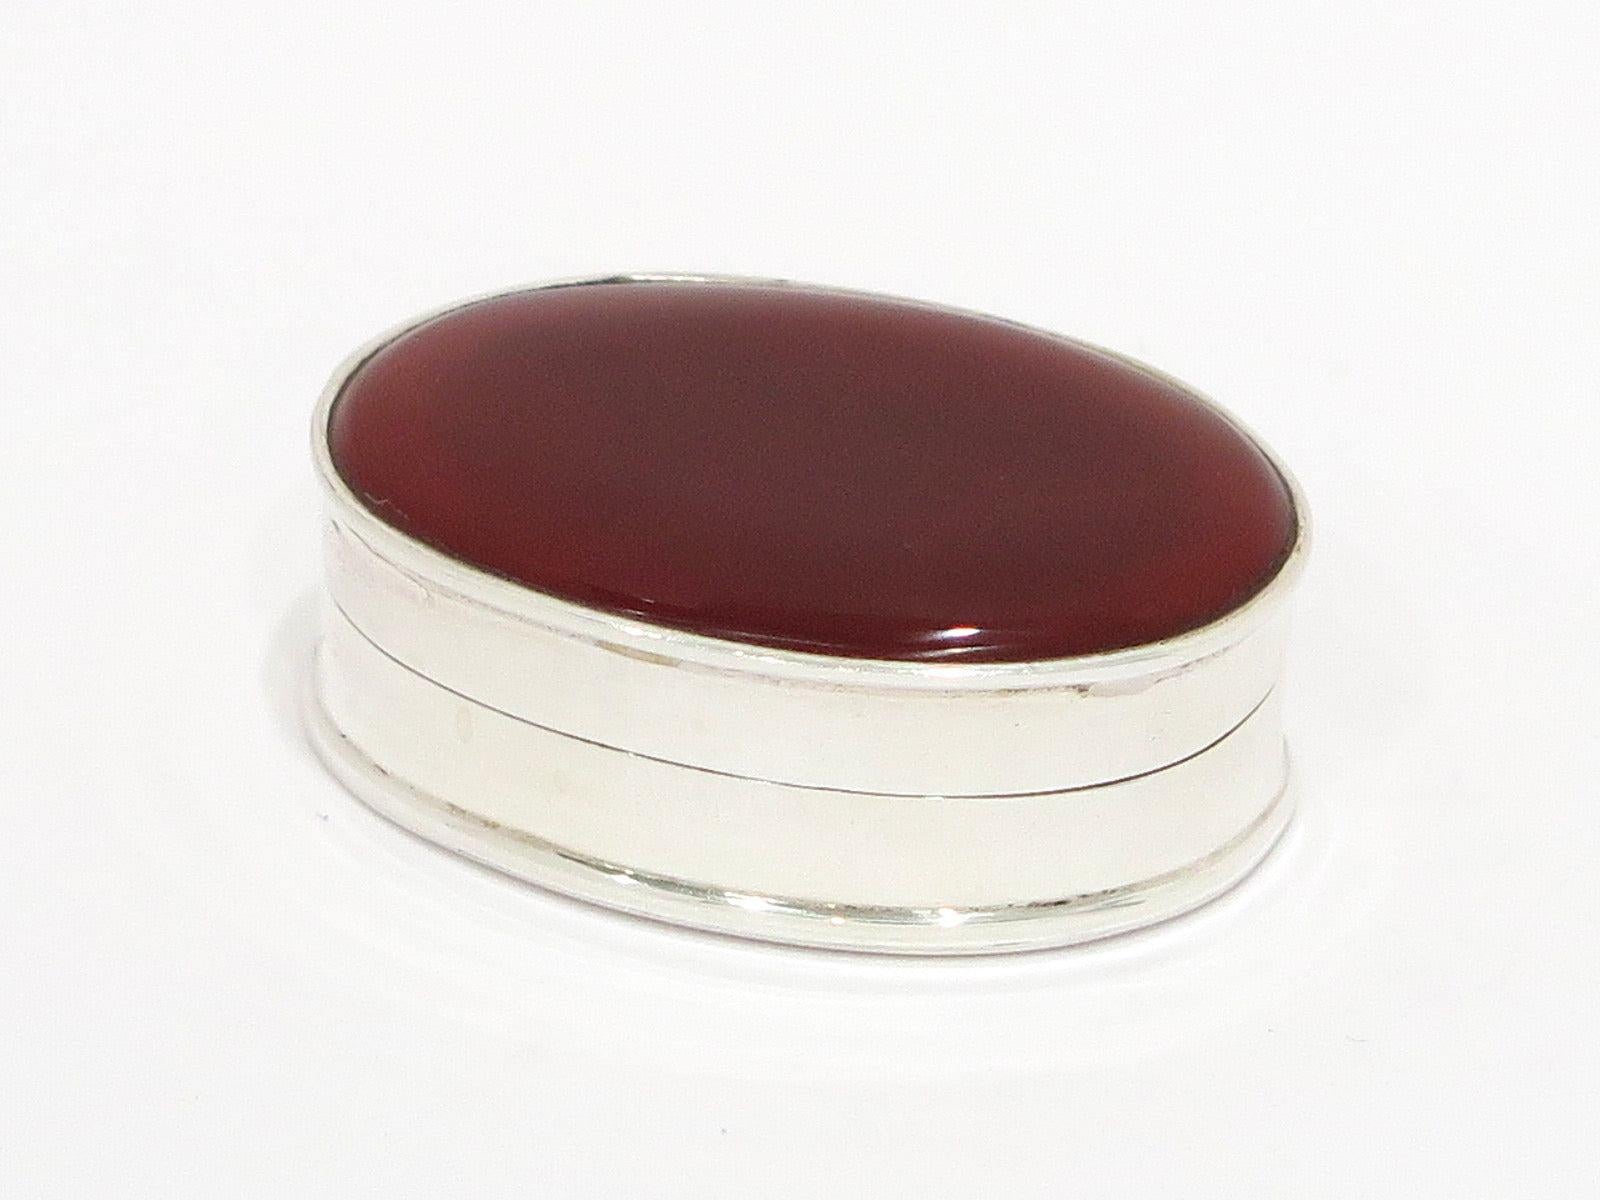 British 1 3/8 in - Sterling Silver Vintage London Import Mark Carnelian Oval Pill Box